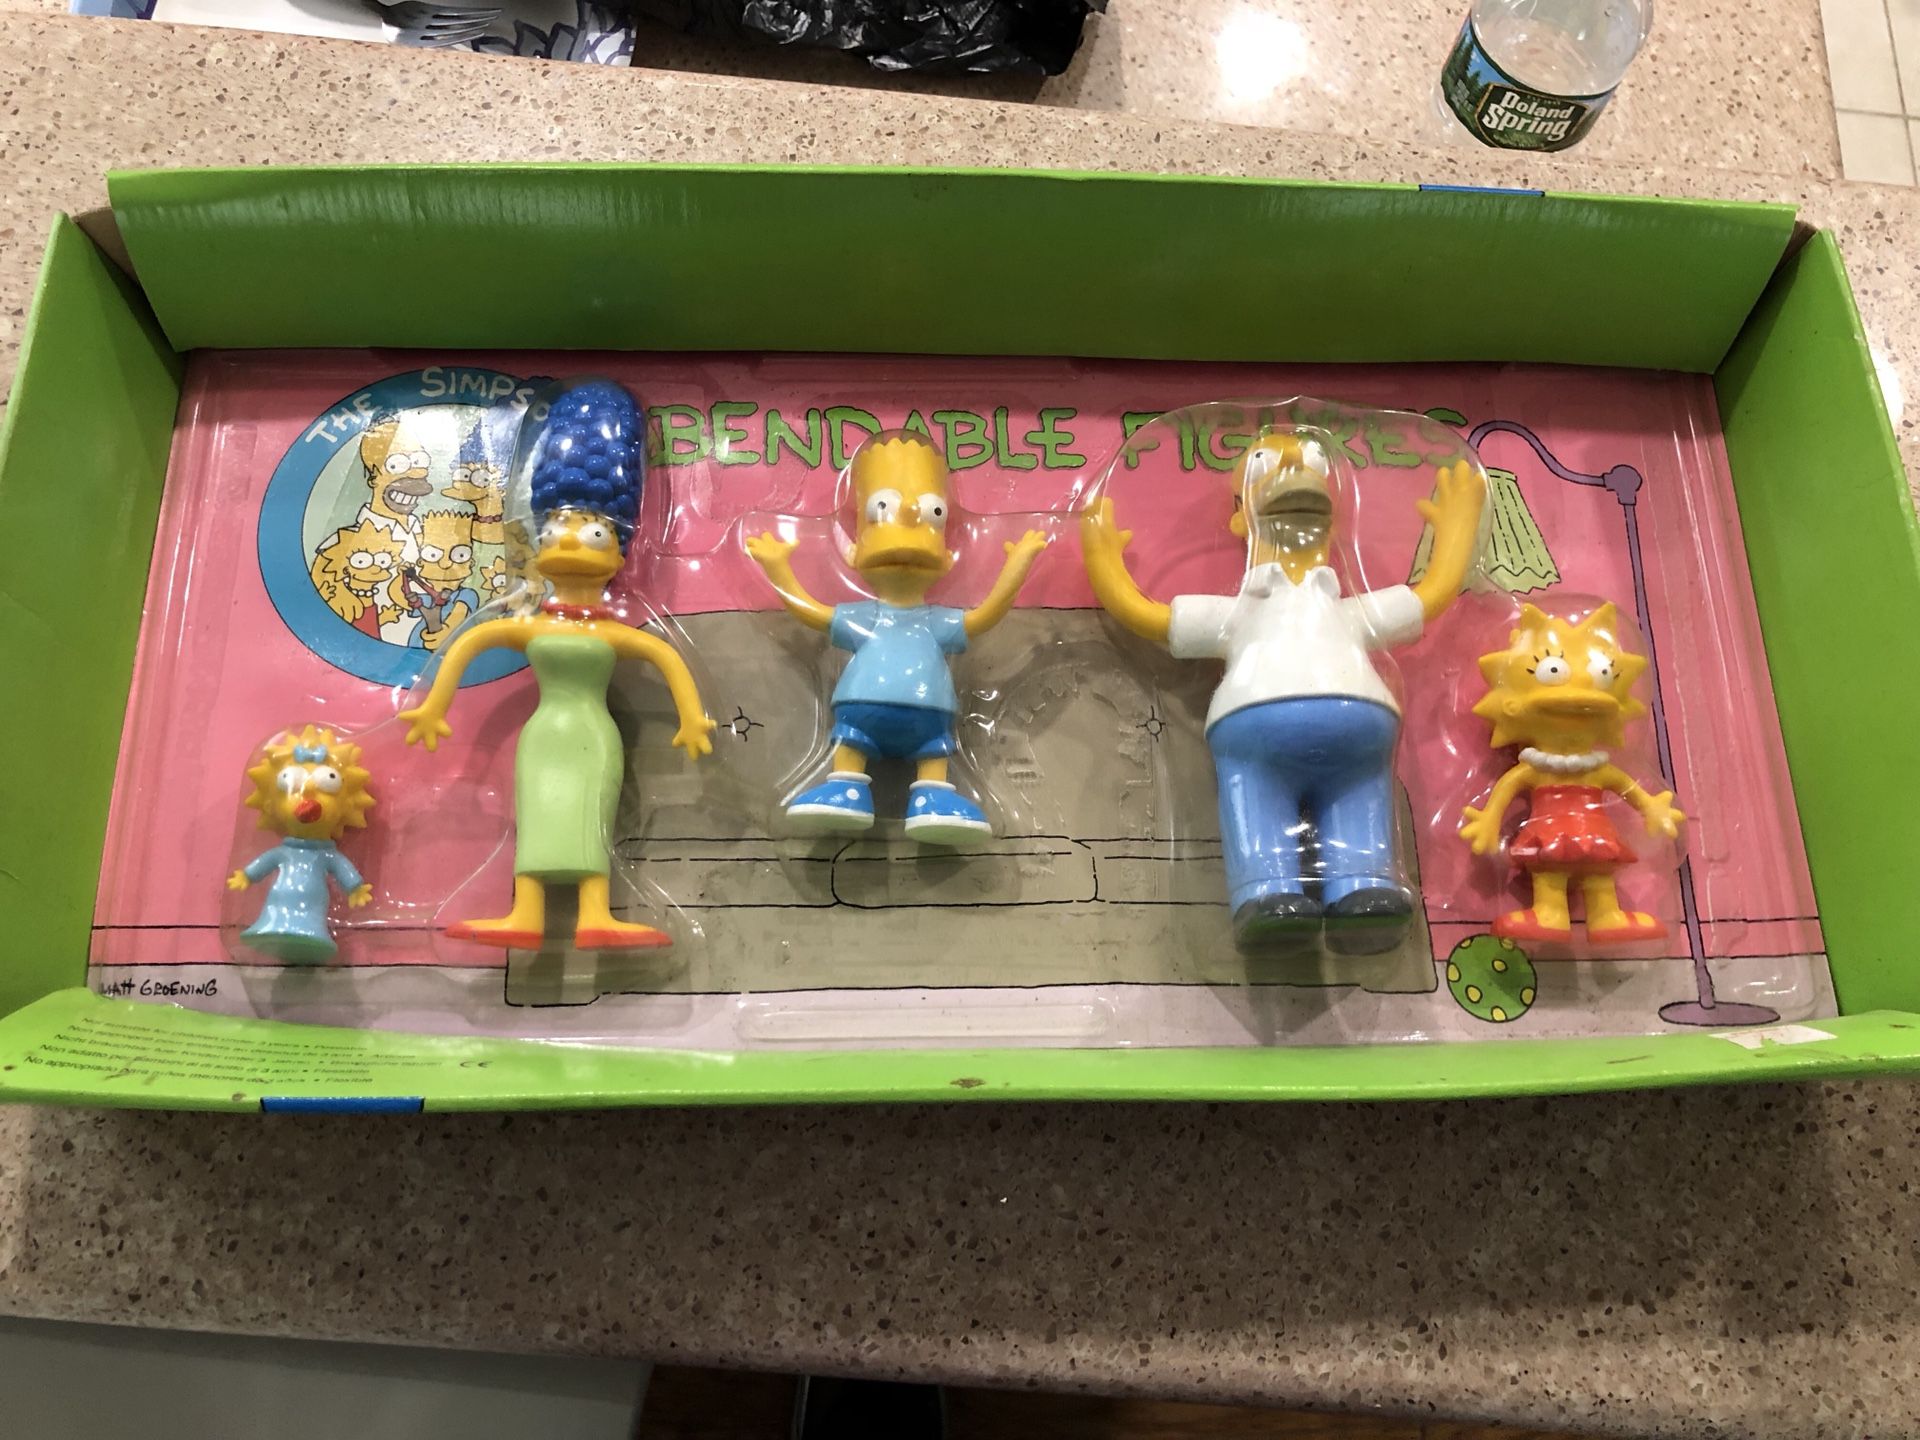 1990 The Simpson’s bendable Action figures toy